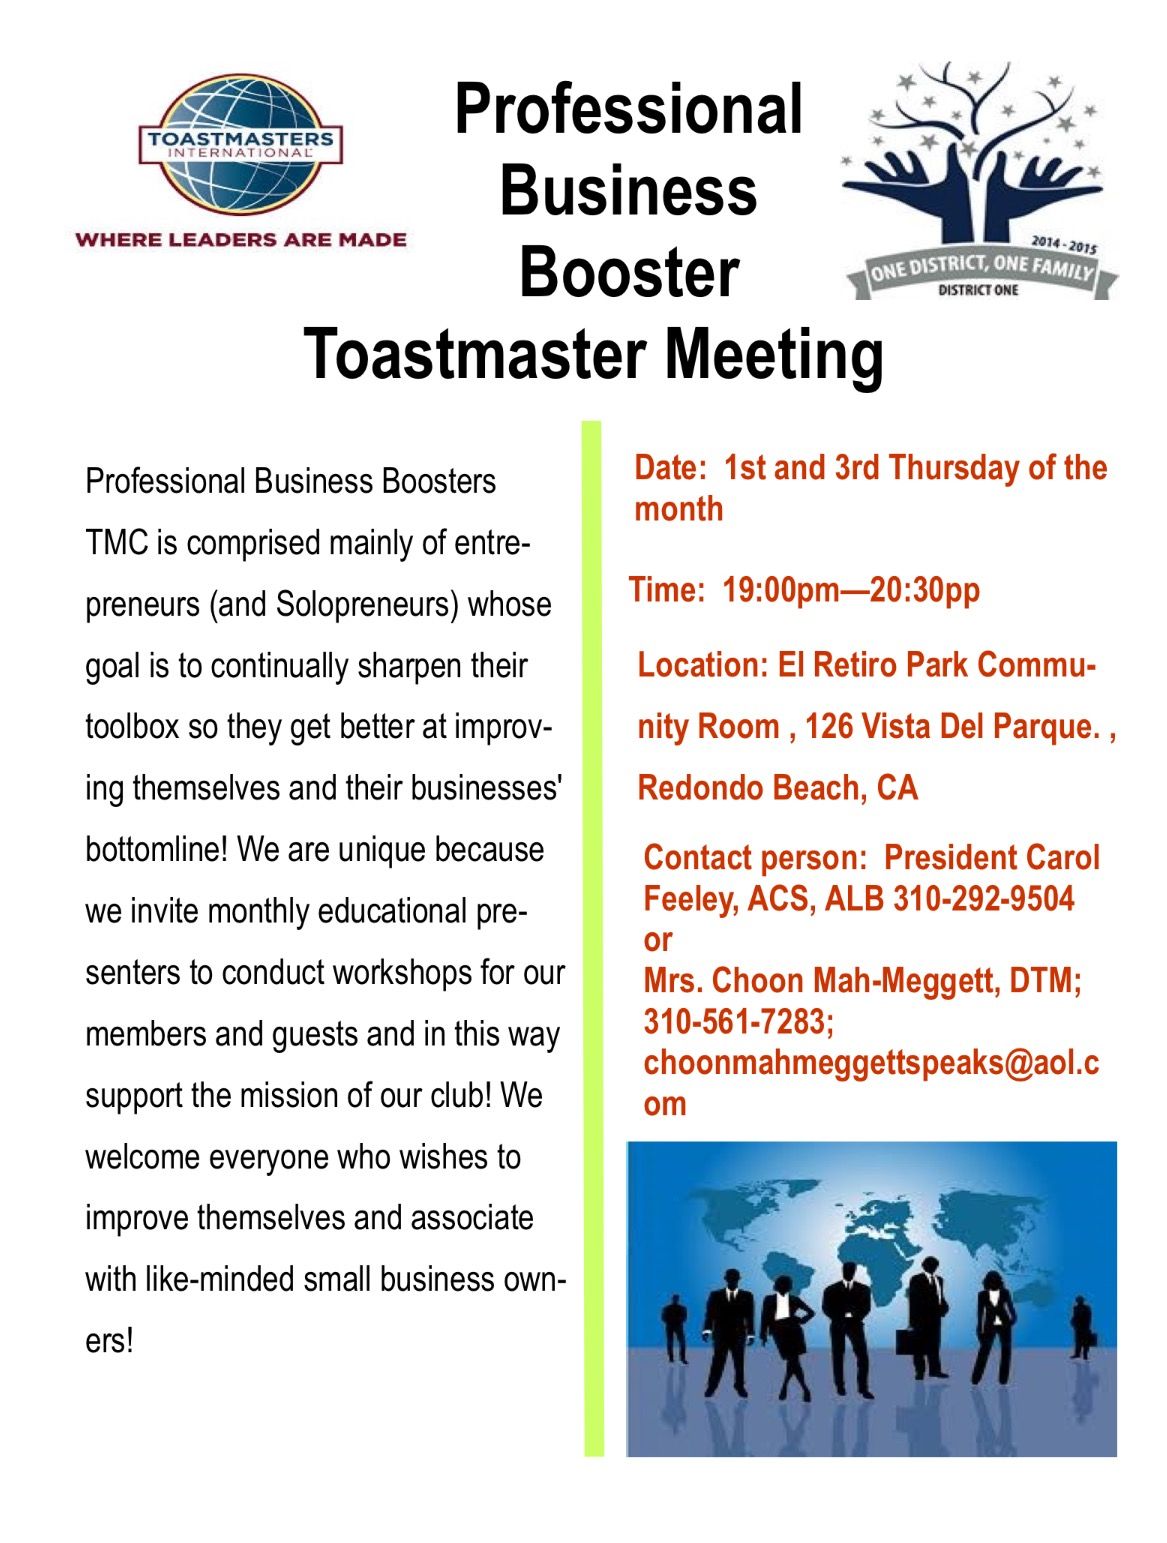 How Do You Introduce Yourself In Toastmasters